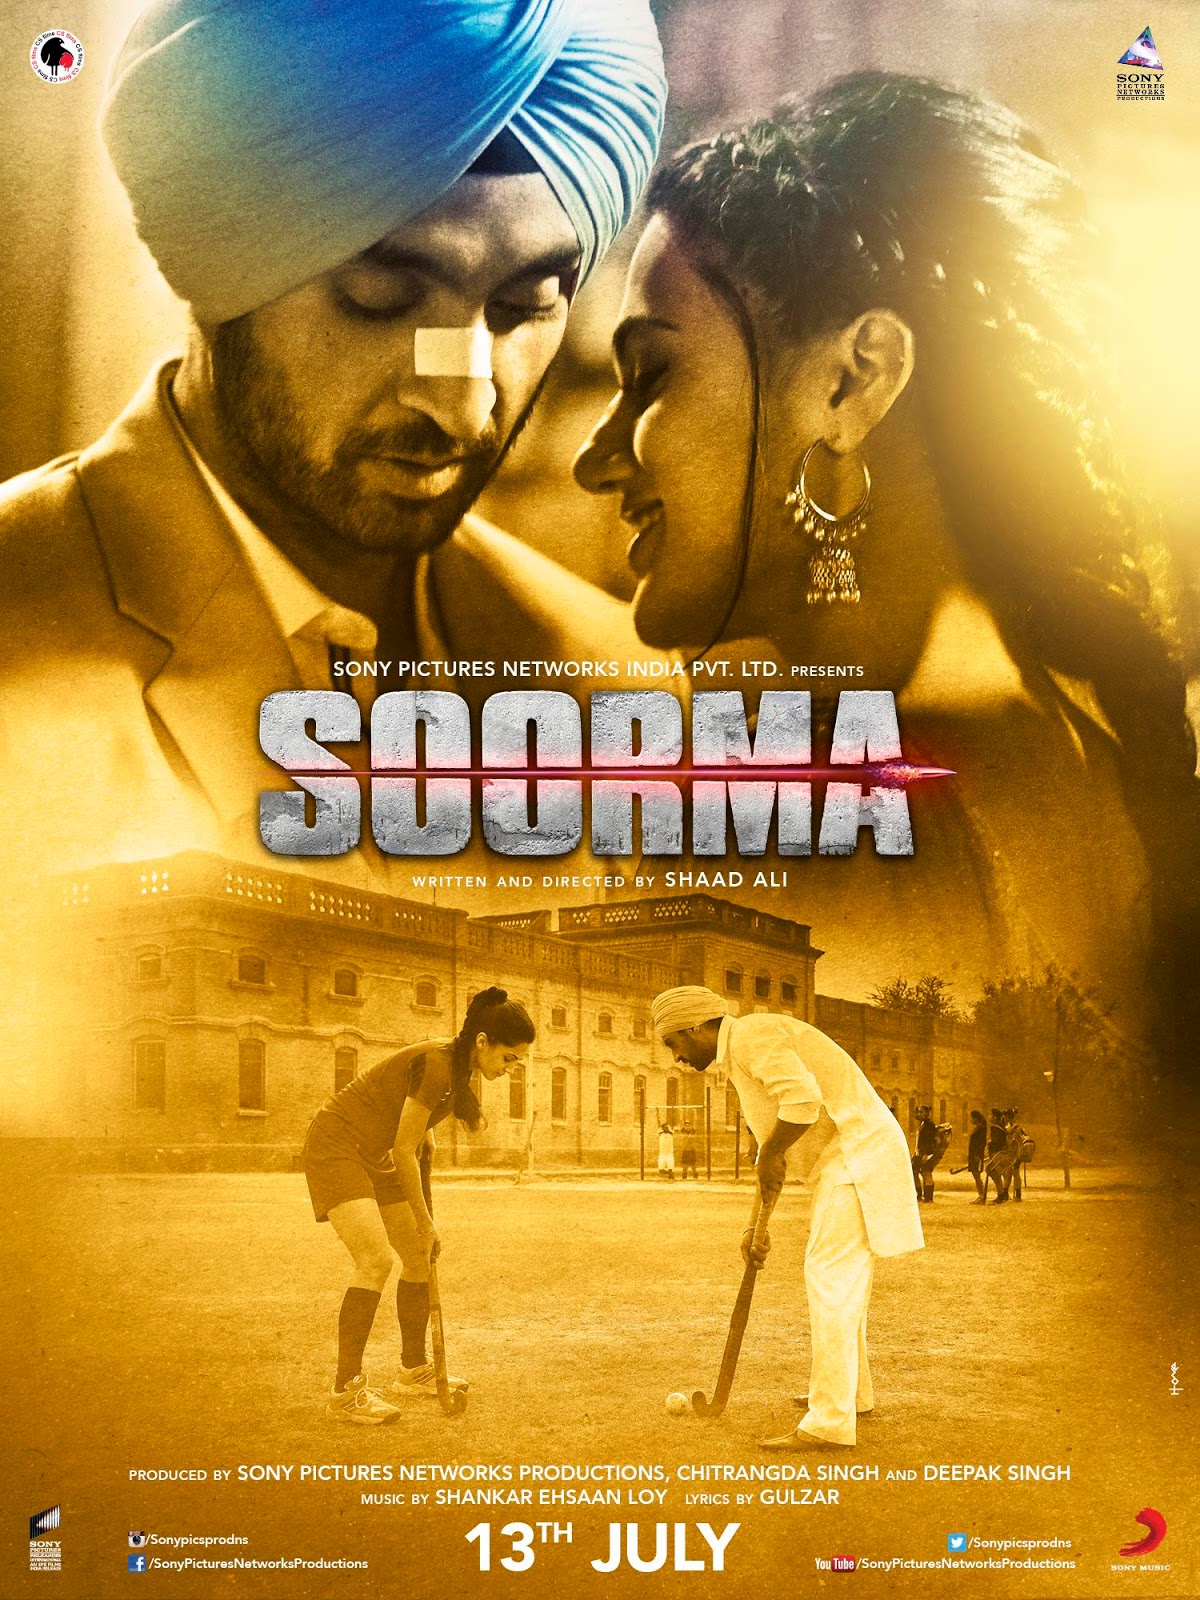 SOORMA Sutradara Shaad Ali Produksi Sony Networks India and C S s Distribusi Sony Releasing & Columbia Picture